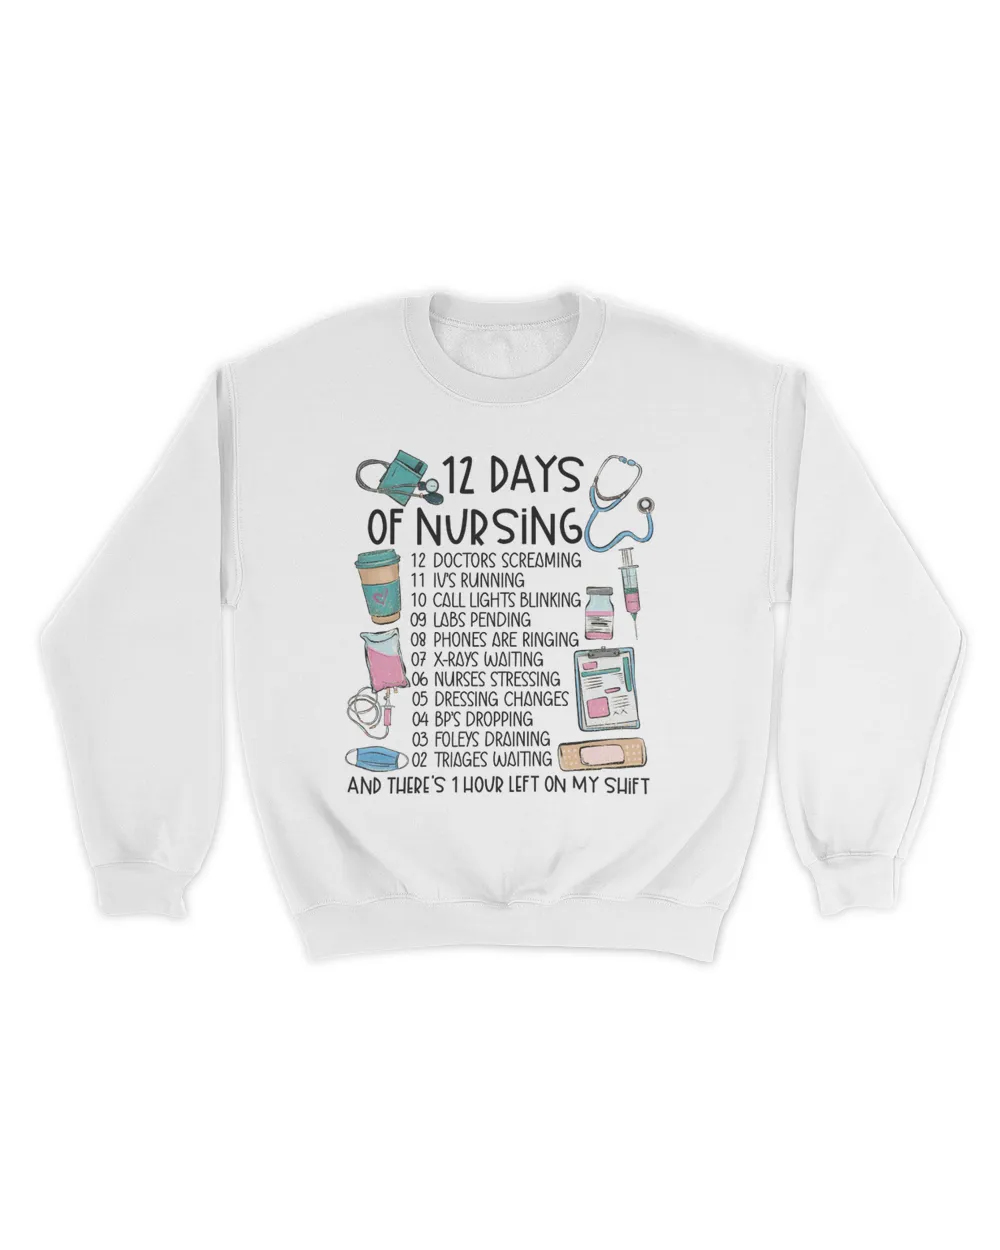 12 Days Of Nursing And There Is 1 Hour Left On My Shift, Retro Comfort Nurse Shirt